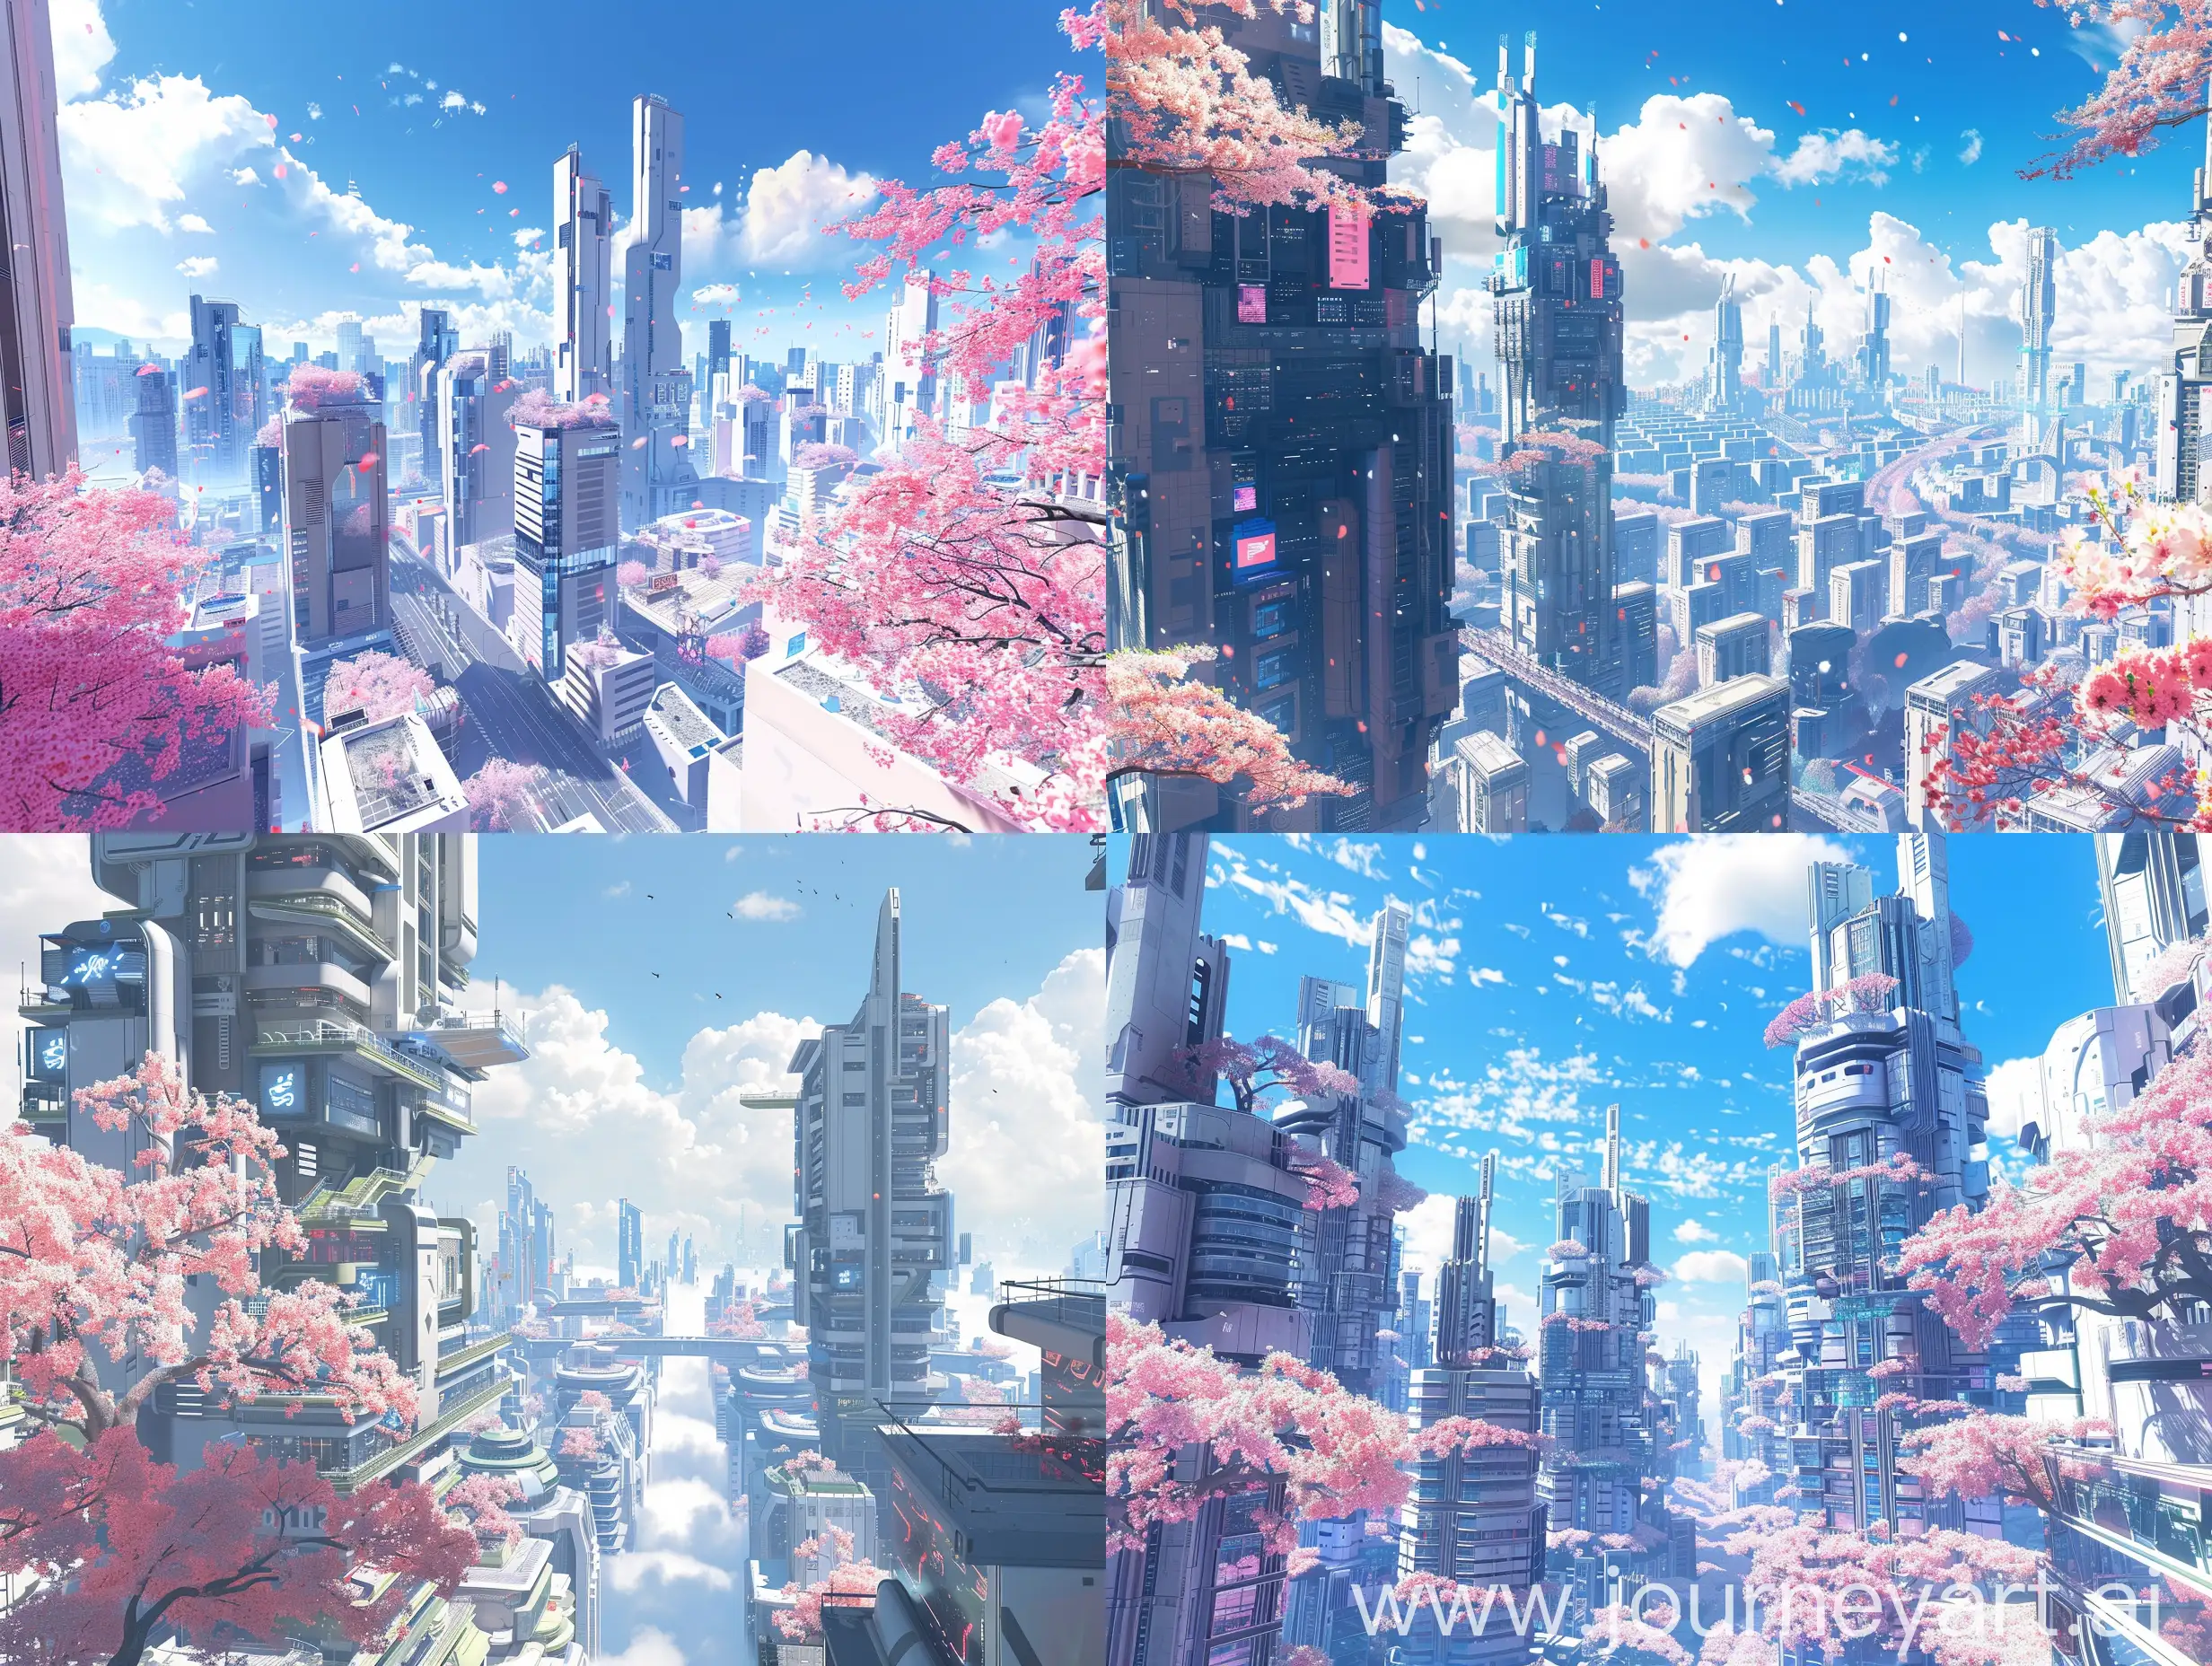 A never-ending futuristic city skyline with stunning and surreal minimalist buildings during the spring season. The scene has an anime-inspired utopian vibe, reminiscent of Tokyo, with vibrant visuals.

